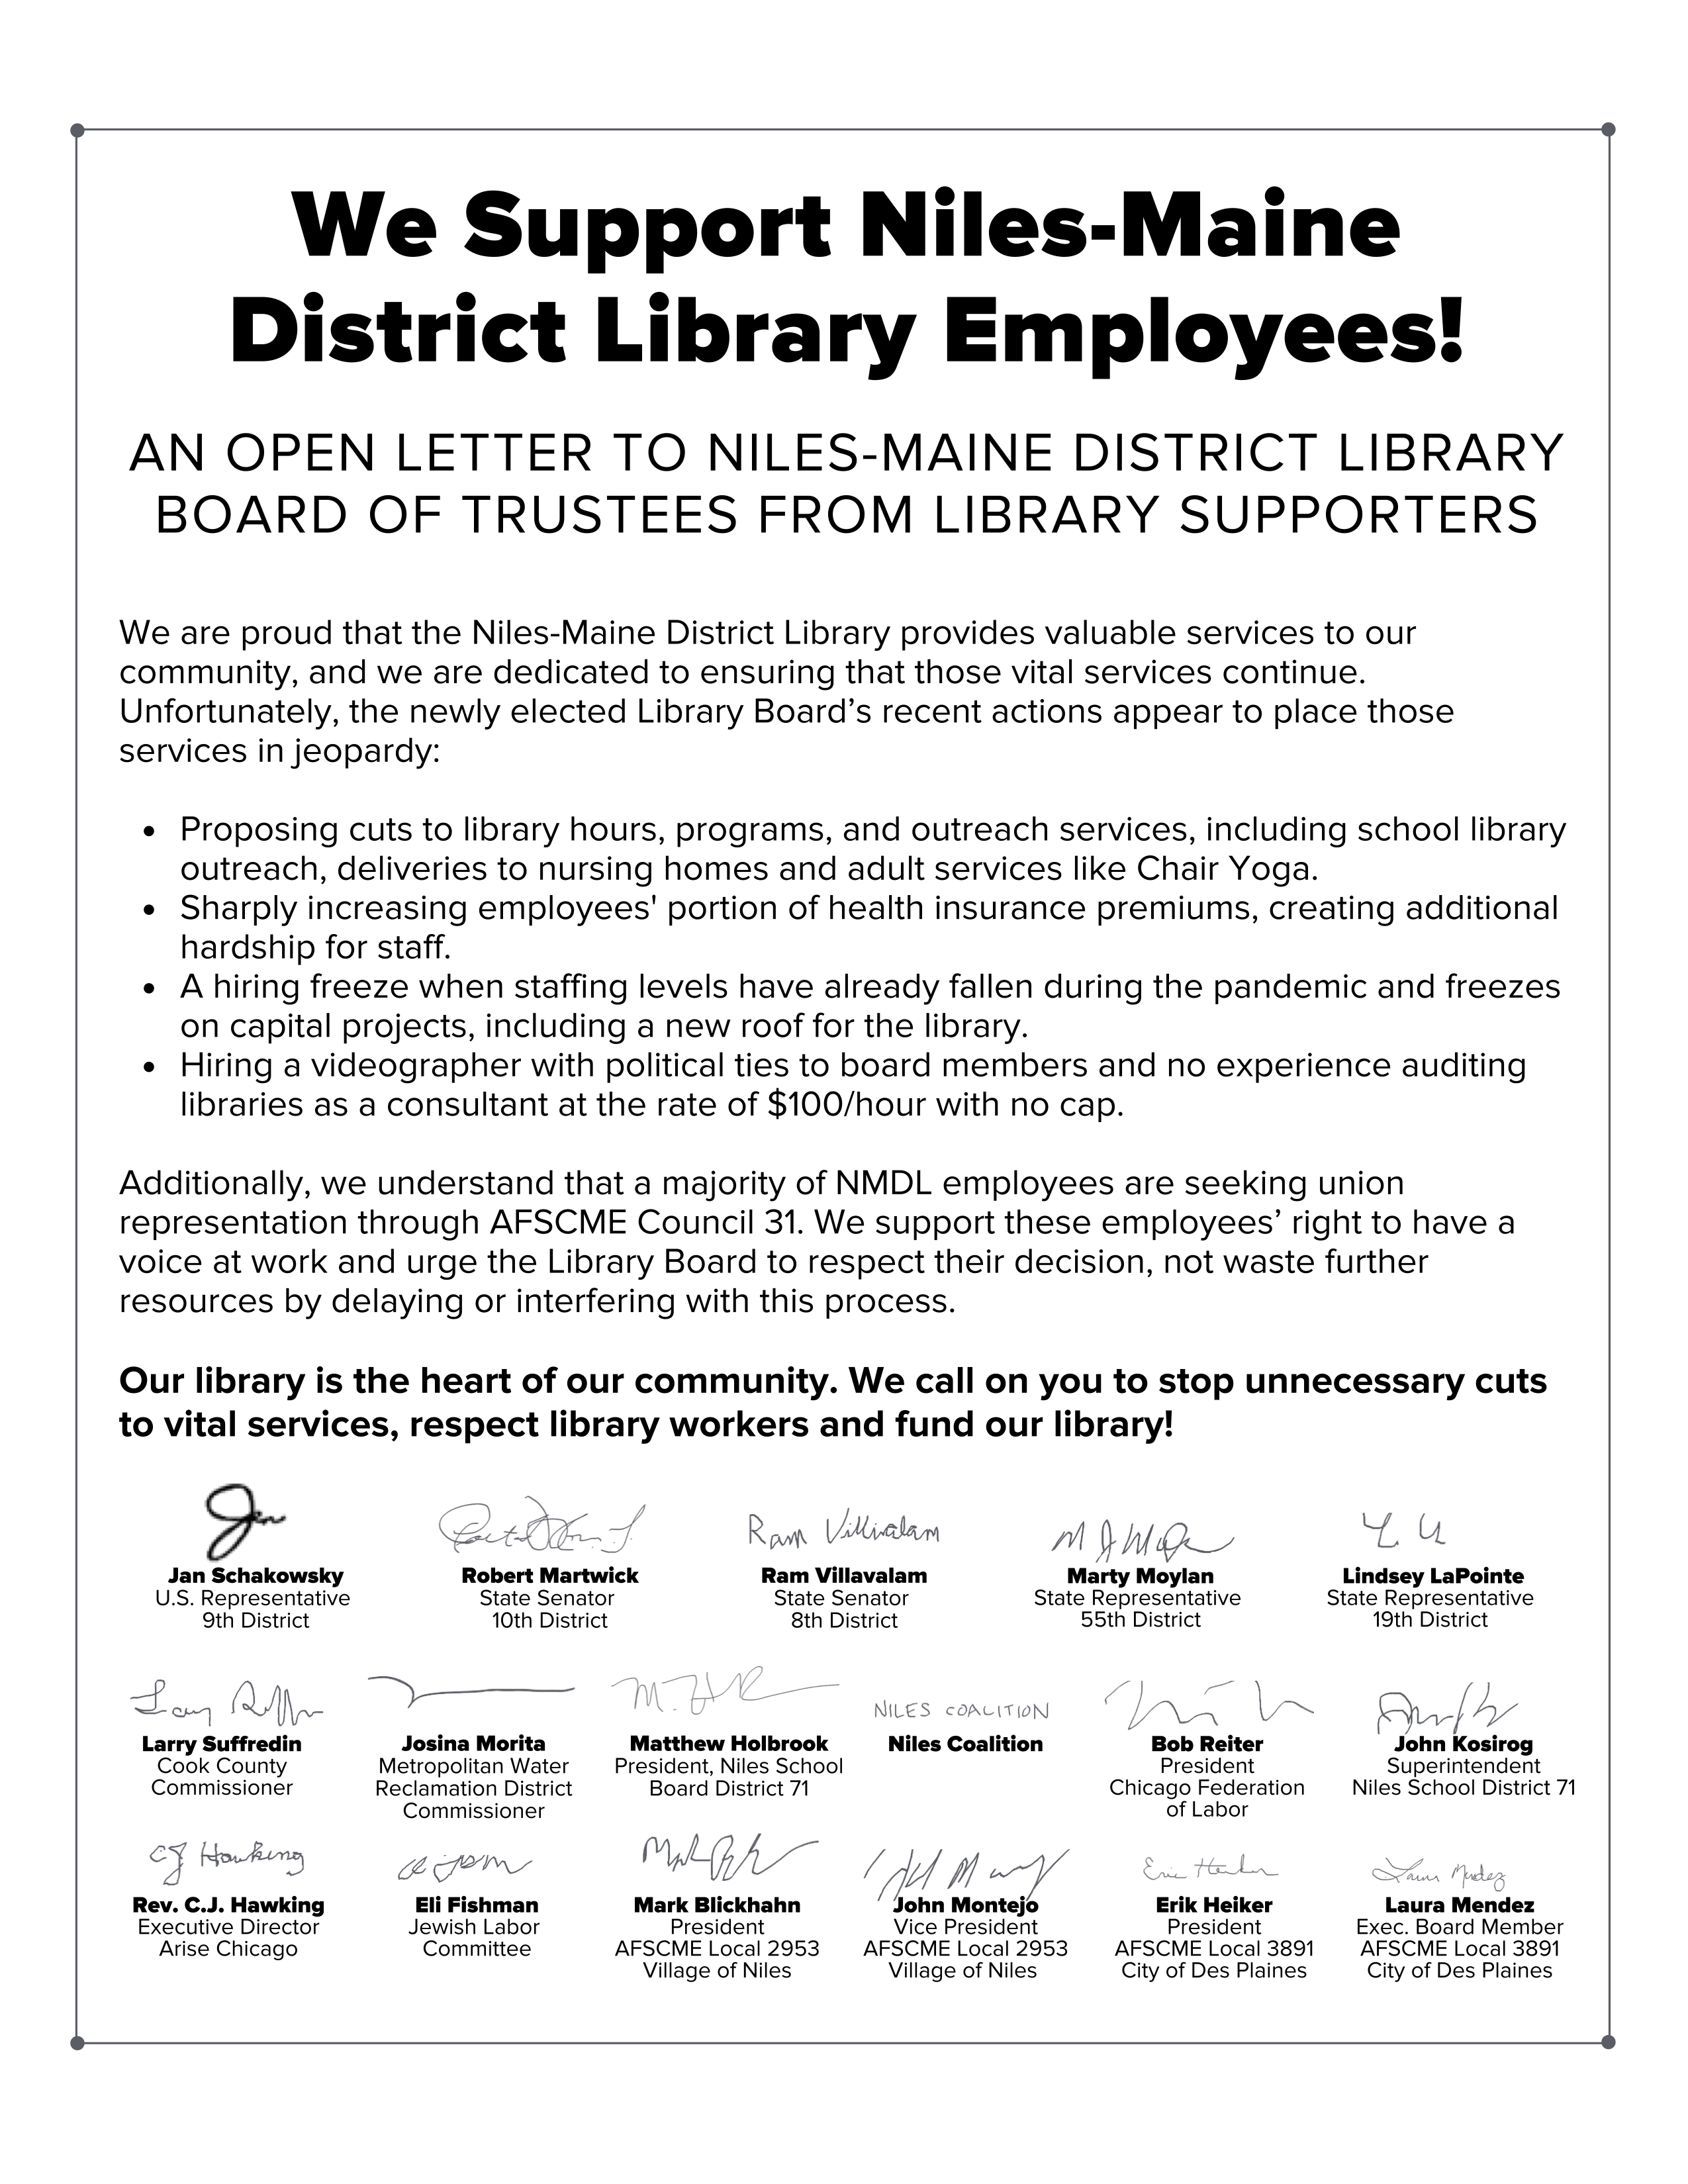 We Support Niles-Maine District Library Employees